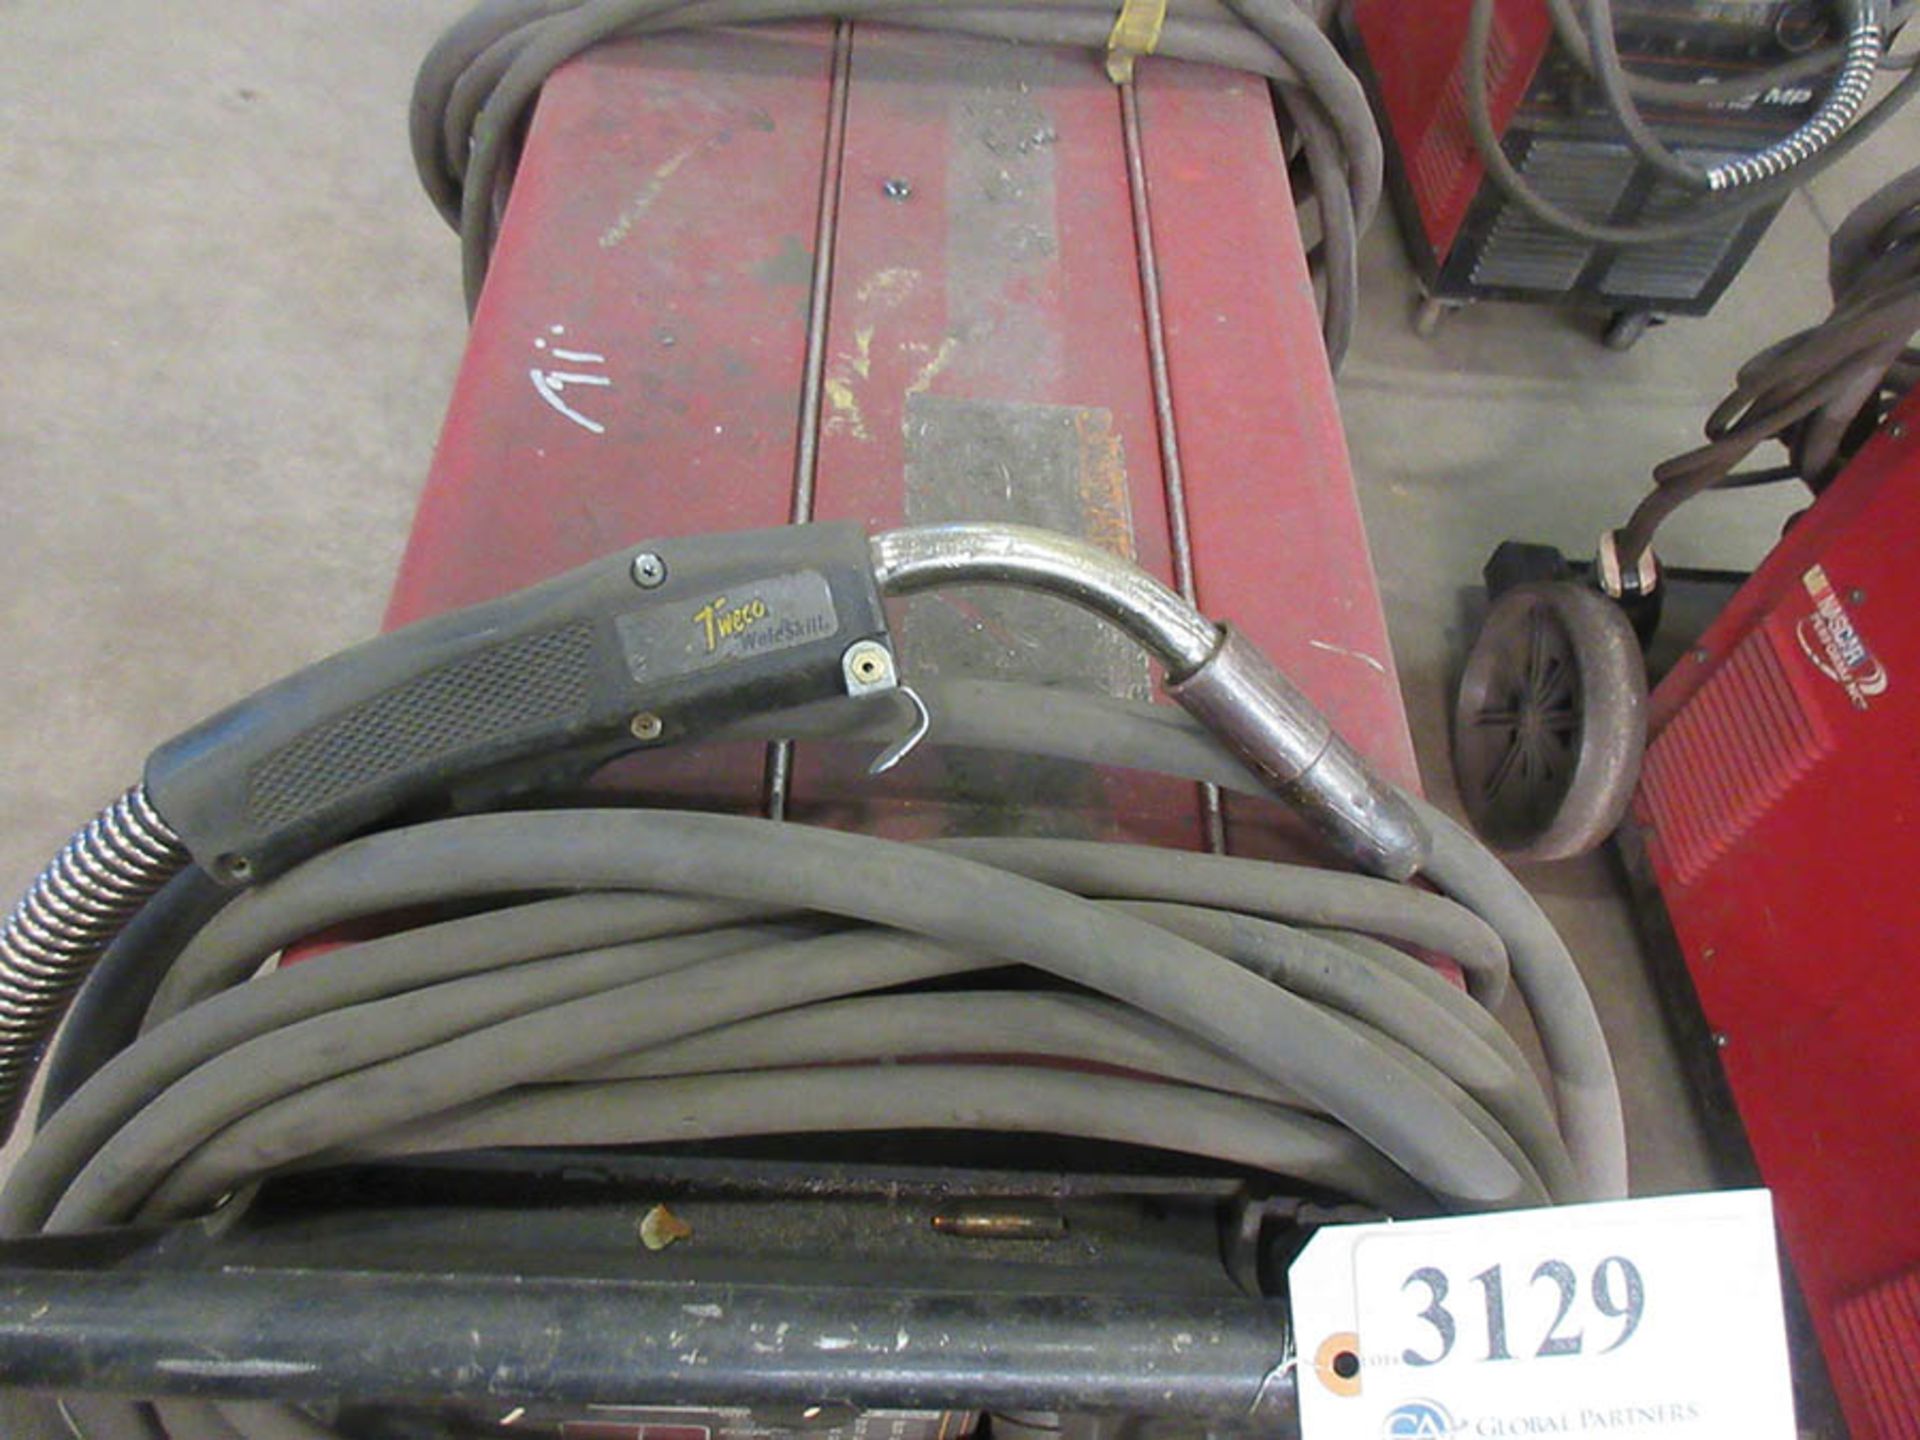 LINCOLN ELECTRIC 350MP POWER MIG WELDER WITH TWECO WELDSKILL MIG GUN, #65 - Image 3 of 3